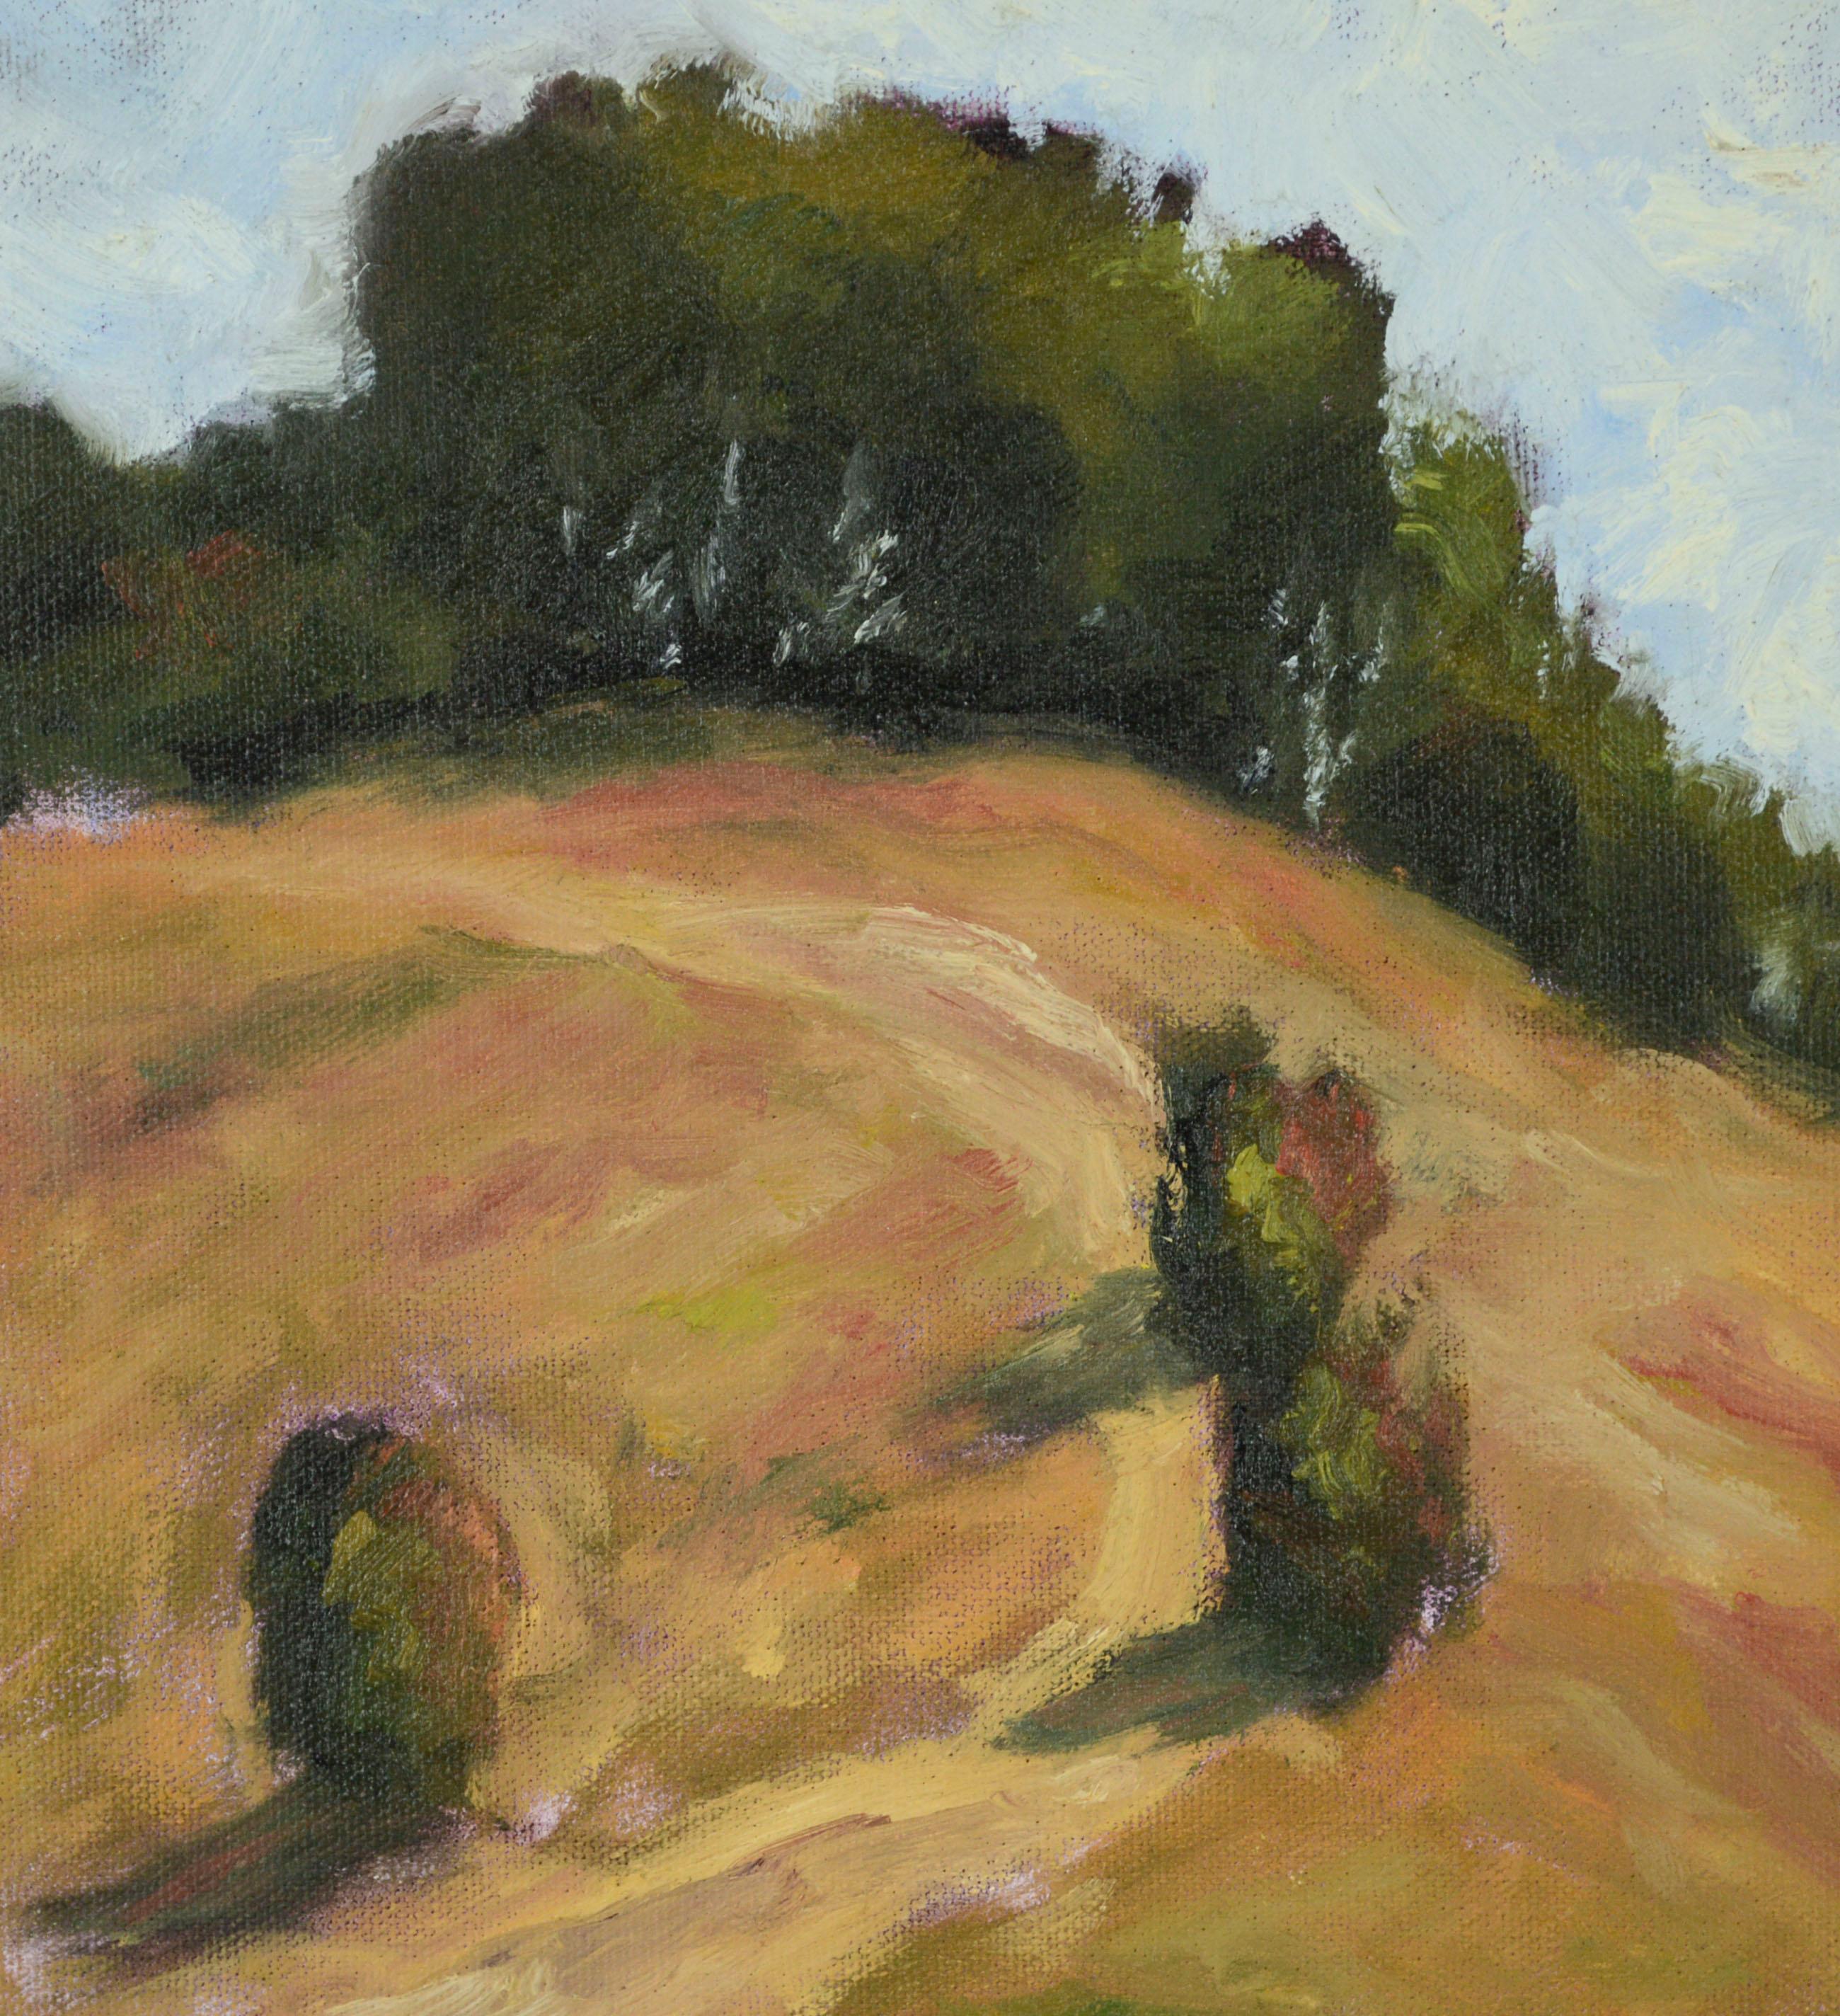 Picchetti Ranch Hilltop Oak Tree Trail, Bay Area California Landscape  - Painting by Unknown